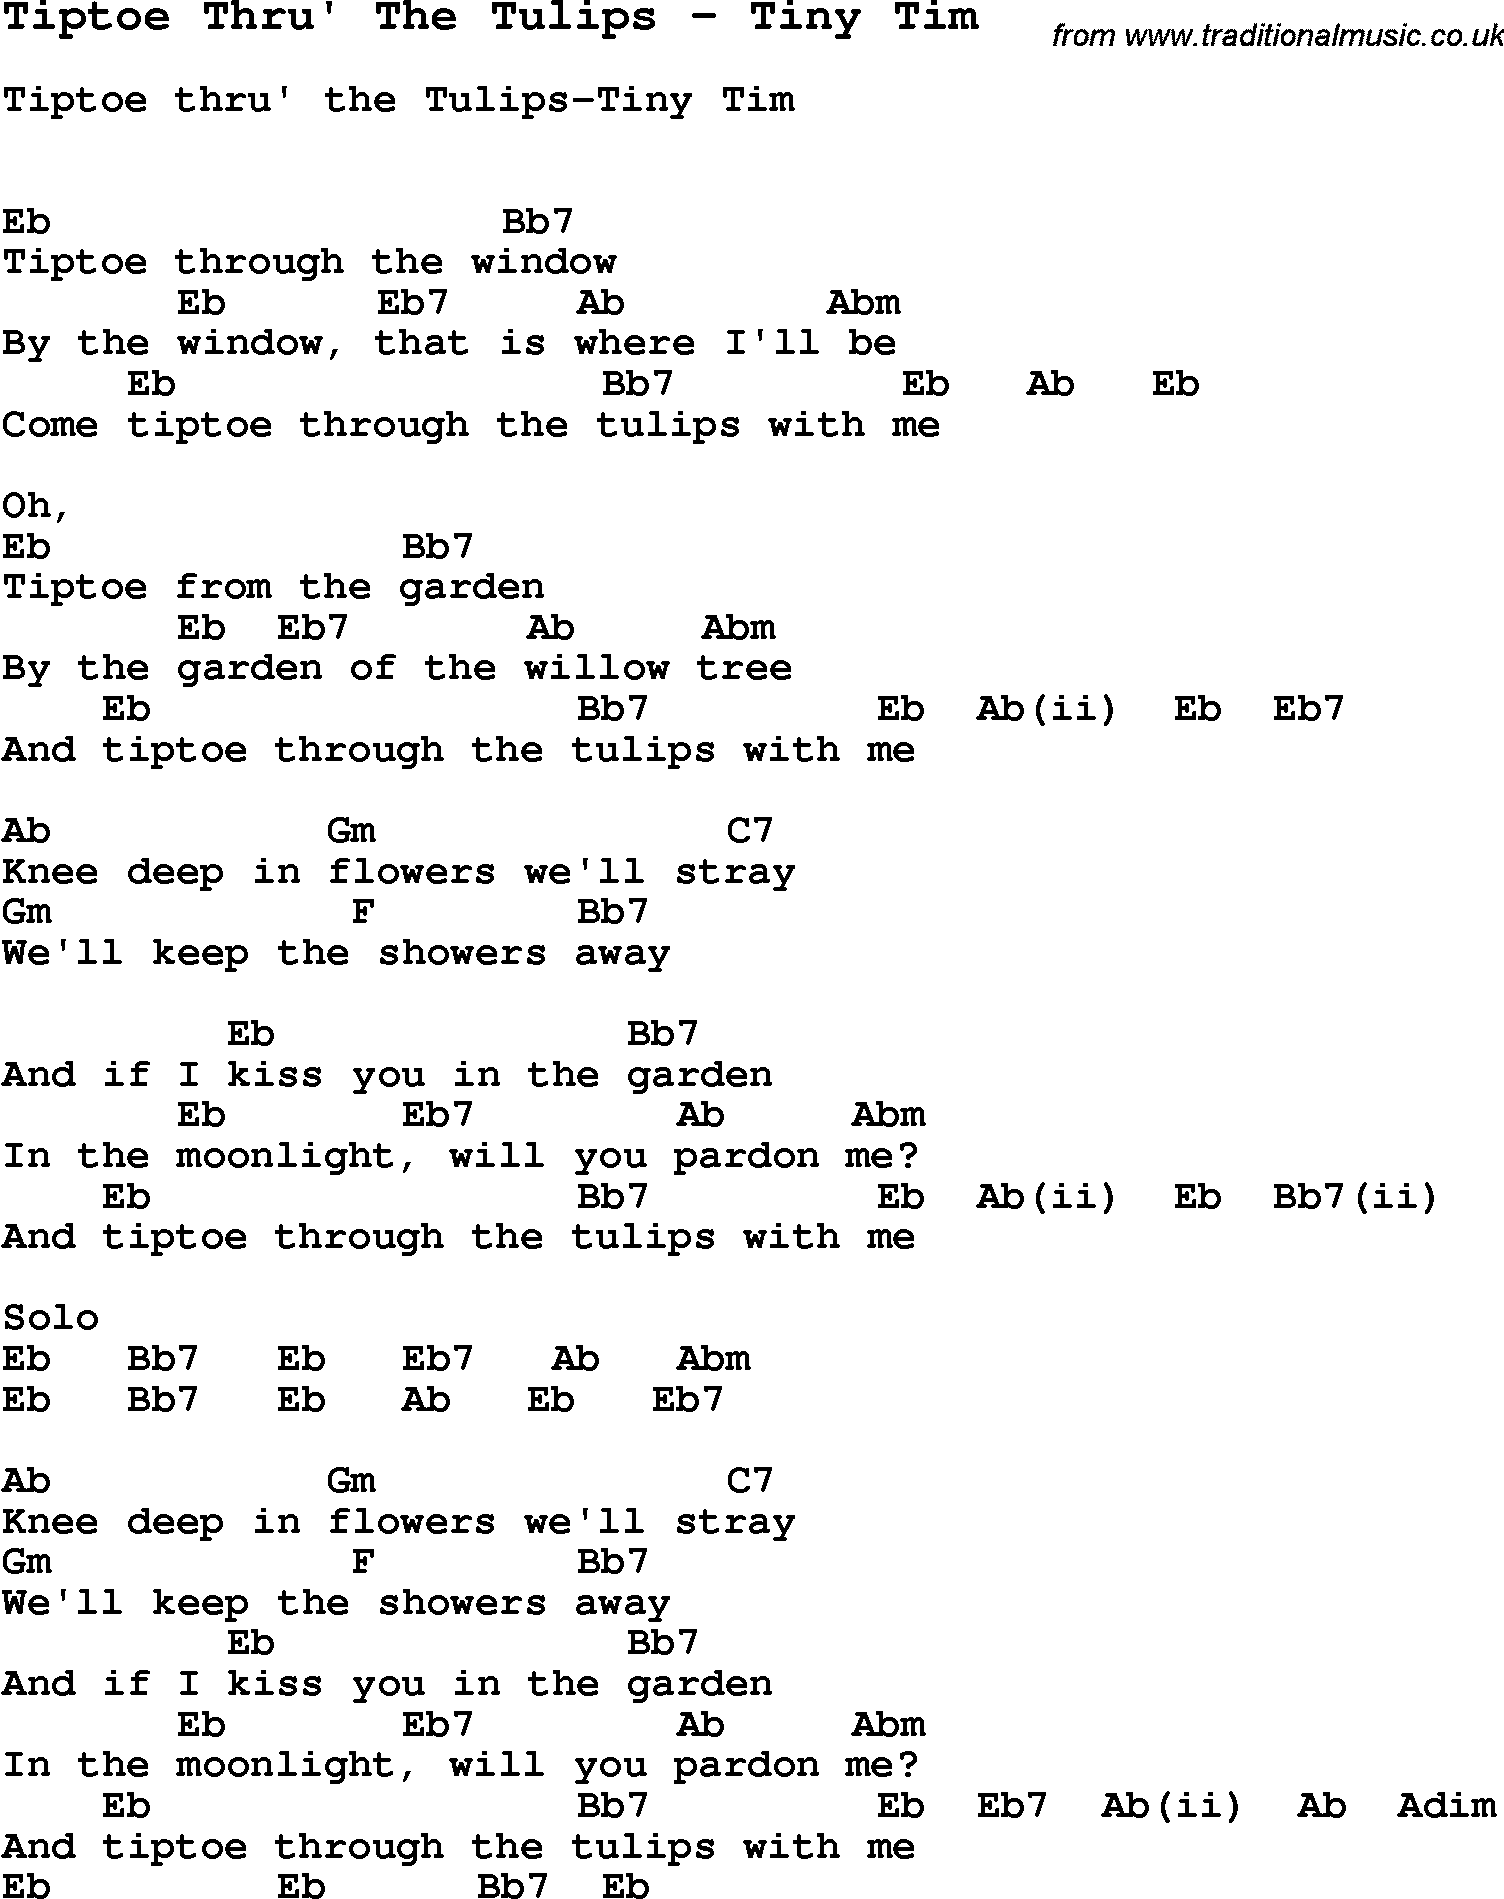 Song Tiptoe Thru' The Tulips by Tiny Tim, with lyrics for vocal performance and accompaniment chords for Ukulele, Guitar Banjo etc.